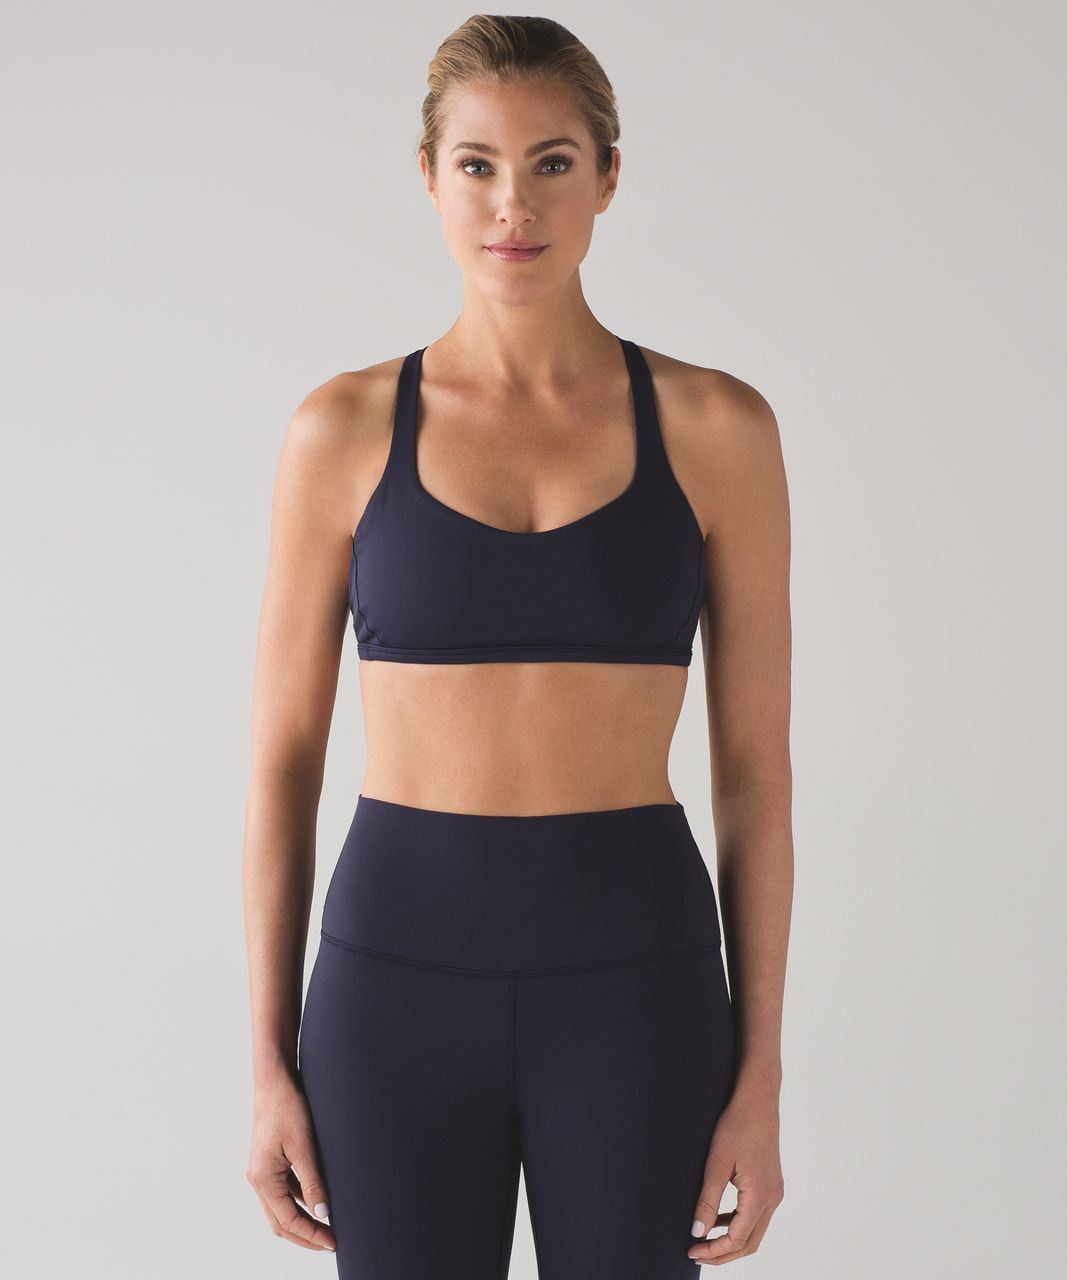 O U T F I T D E T A I L S : LULULEMON ZEN BENDER TOP ( SIMILAR ), SPORTS  BRA ( ALSO HAVE THIS ONE ), PEEK…